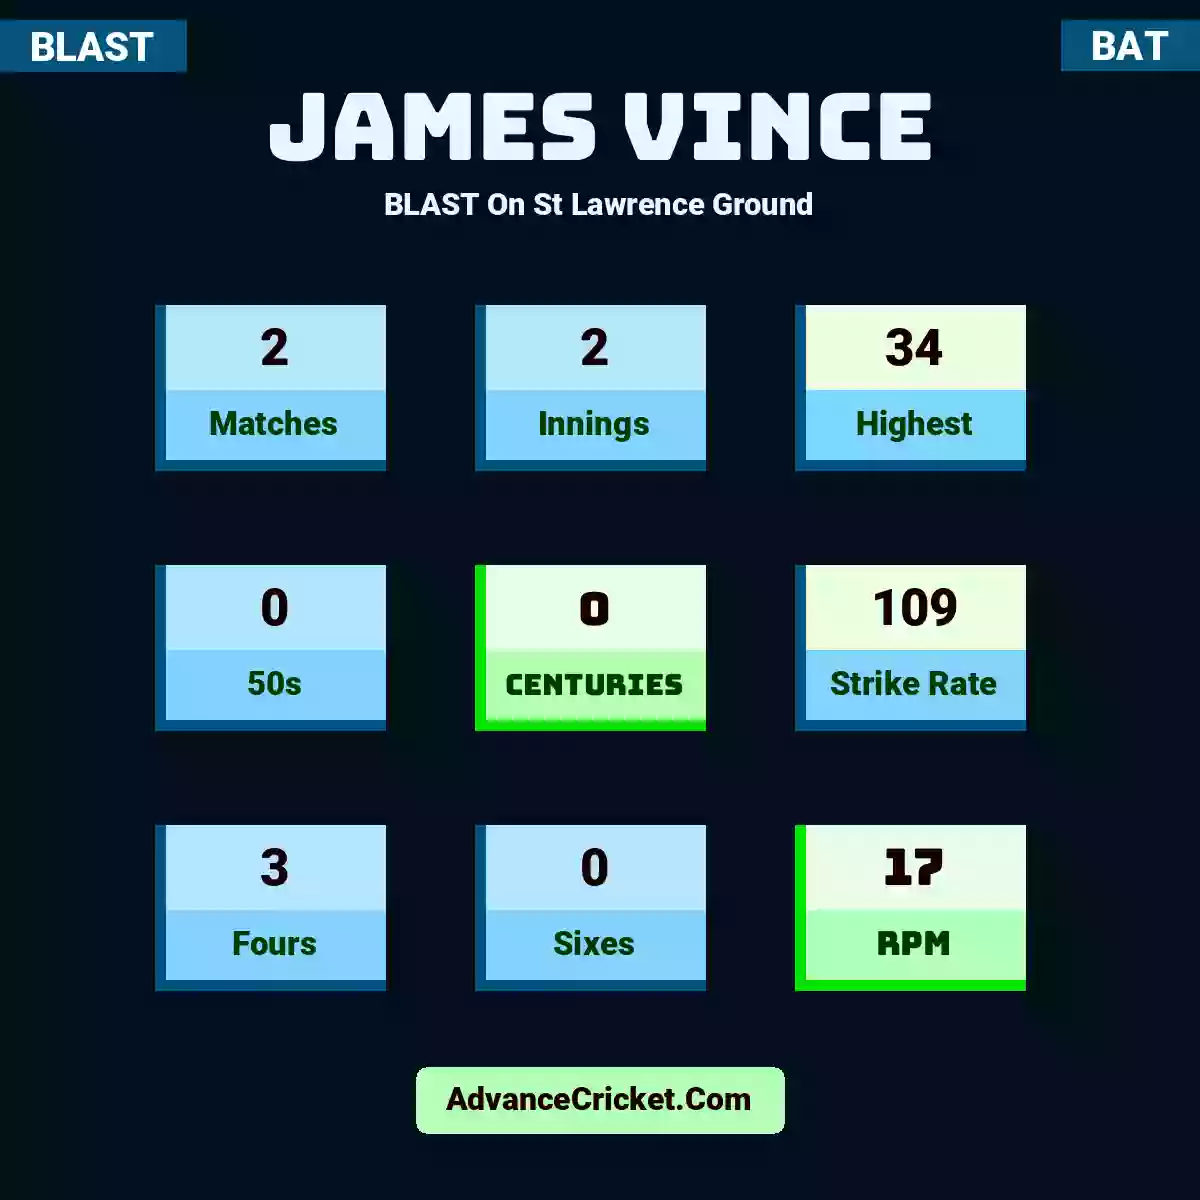 James Vince BLAST  On St Lawrence Ground, James Vince played 2 matches, scored 34 runs as highest, 0 half-centuries, and 0 centuries, with a strike rate of 109. J.Vince hit 3 fours and 0 sixes, with an RPM of 17.